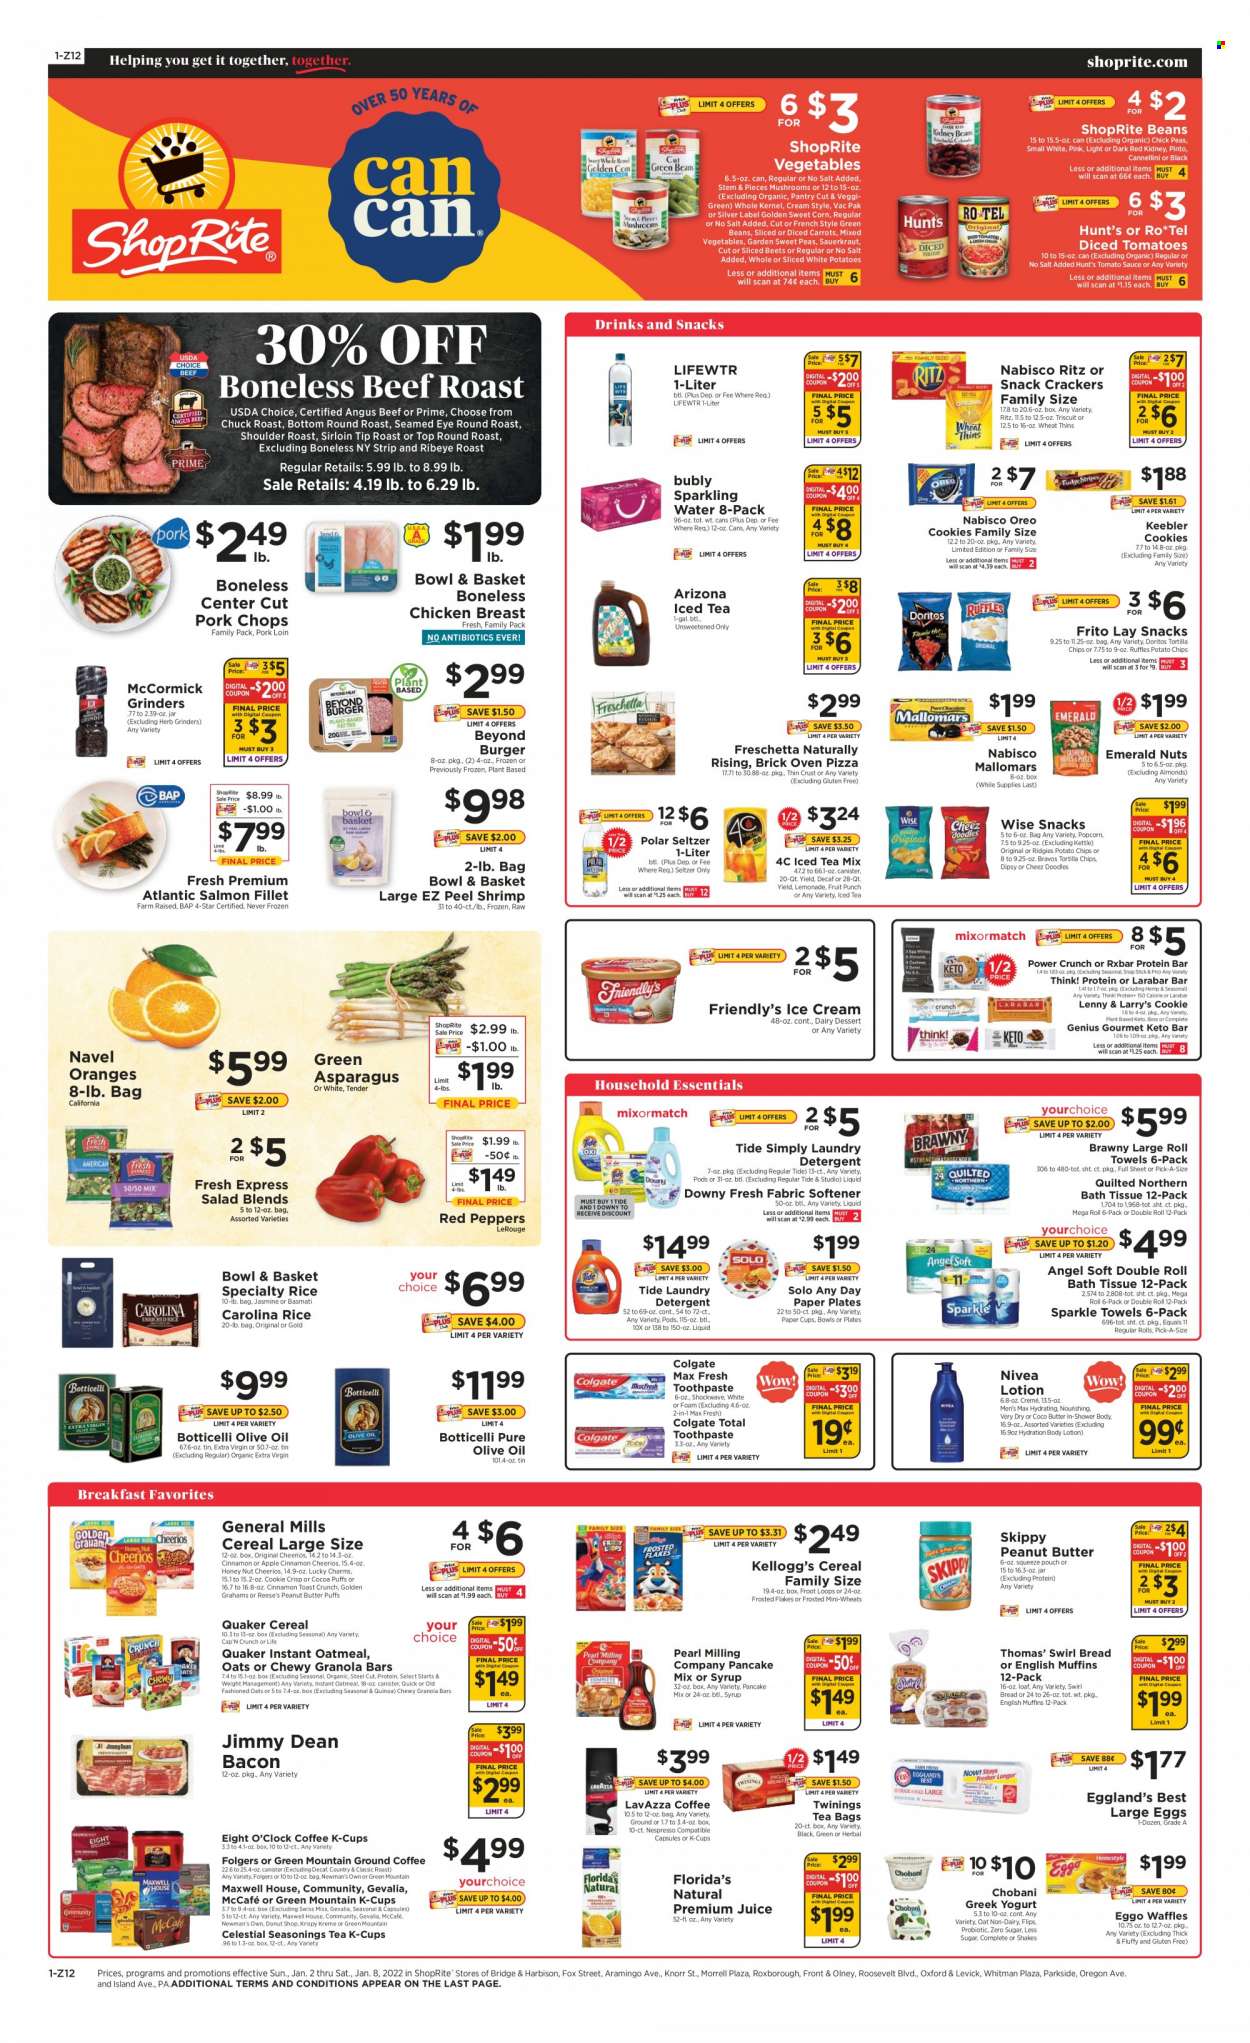 ShopRite Flyer - 01/02/2022 - 01/08/2022 - Sales products - bread, Bowl & Basket, asparagus, corn, green beans, salad, peppers, sweet corn, red peppers, orange, salmon, salmon fillet, shrimps, pizza, hamburger, Knorr, pancake, Quaker, Jimmy Dean, bacon, greek yoghurt, Oreo, yoghurt, Chobani, Swiss Miss, shakes, large eggs, ice cream, Reese's, Friendly's Ice Cream, mixed vegetables, cookies, crackers, Kellogg's, Florida's Natural, Keebler, RITZ, Doritos, tortilla chips, potato chips, Thins, popcorn, oatmeal, sauerkraut, tomato sauce, cereals, Cheerios, protein bar, granola bar, Cap'n Crunch, Frosted Flakes, basmati rice, quinoa, rice, extra virgin olive oil, olive oil, oil, peanut butter, almonds, nuts, lemonade, juice, AriZona, fruit punch, seltzer water, sparkling water, Lifewtr, Maxwell House, tea bags, Twinings, Nespresso, Folgers, coffee capsules, McCafe, K-Cups, Gevalia, Lavazza, Eight O'Clock, Green Mountain, chicken breasts, chicken meat, beef meat, rib eye, round roast, roast beef, chuck roast, pork chops, pork loin, pork meat, Nivea, bath tissue, Quilted Northern, paper towels, detergent, Tide, fabric softener, laundry detergent, Colgate, toothpaste, body lotion, plate, paper, paper plate, party cups, essentials, navel oranges. Page 1.